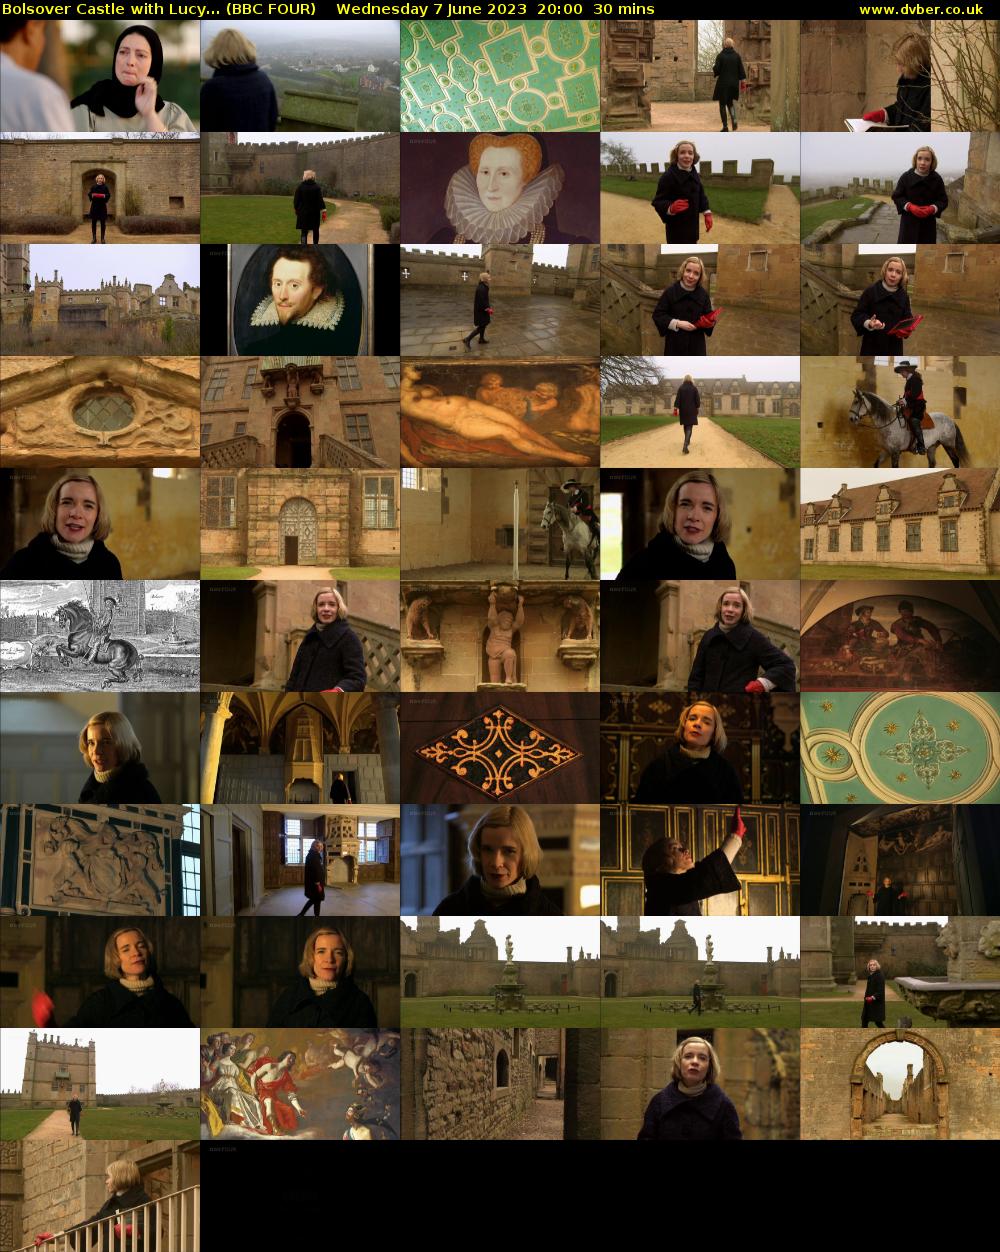 Bolsover Castle with Lucy... (BBC FOUR) Wednesday 7 June 2023 20:00 - 20:30